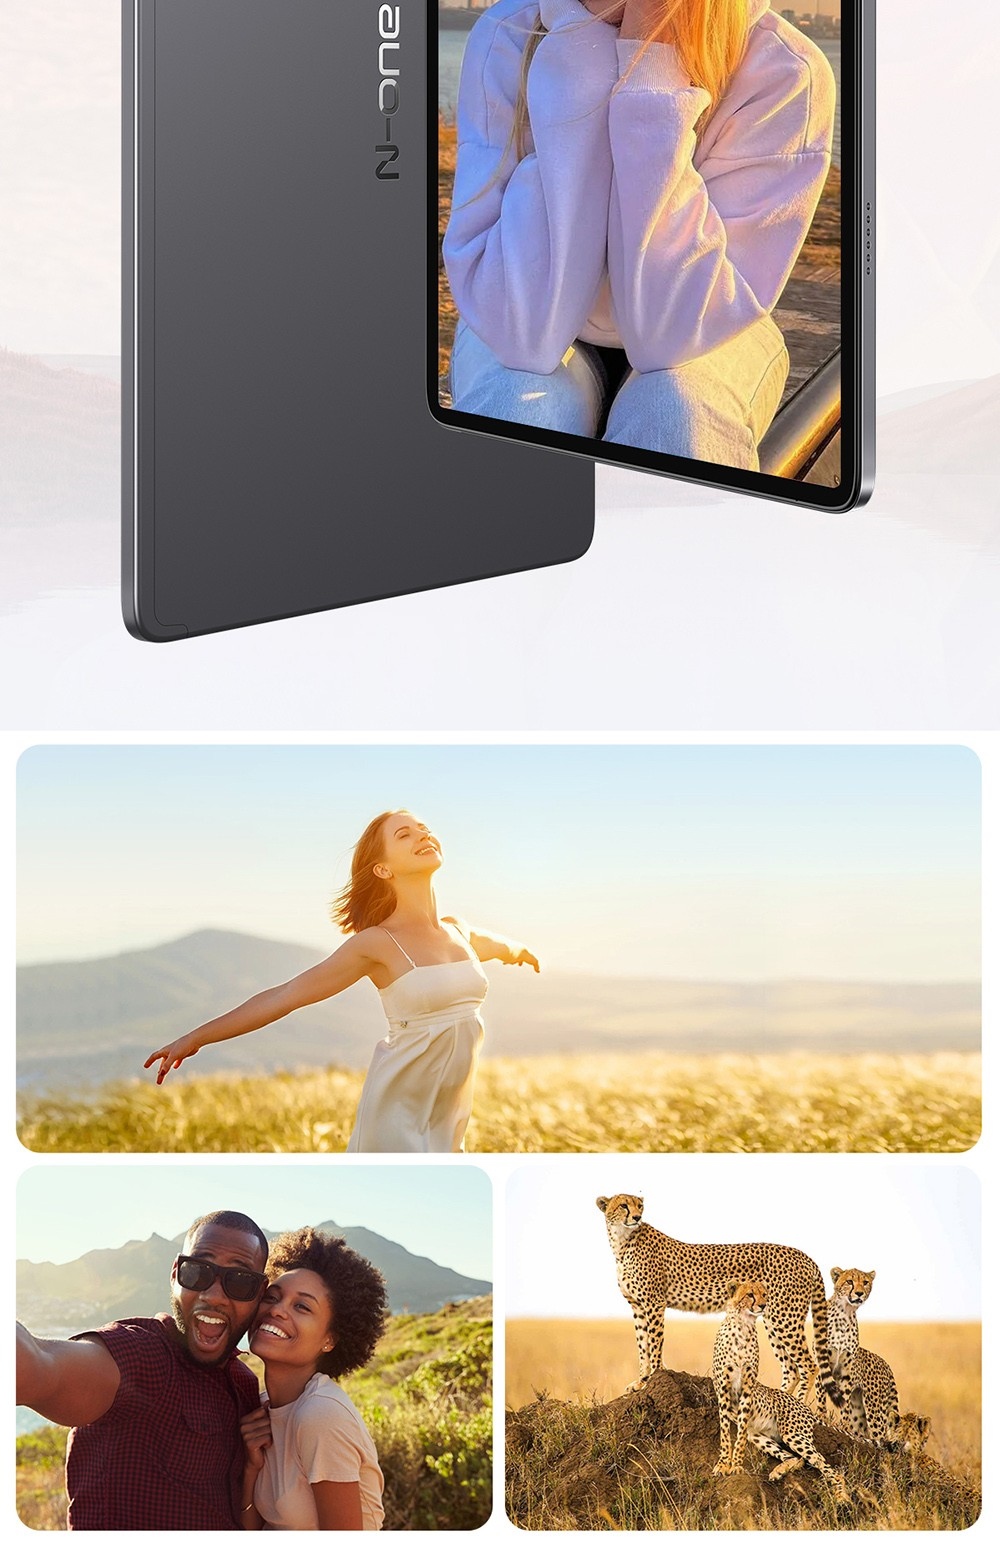 N-one NPad Q 10.1 Tablet with Leather Case Octa-Core CPU, Android 13 OS, 6GB RAM 128GB ROM, 5G WiFi, BT5.0